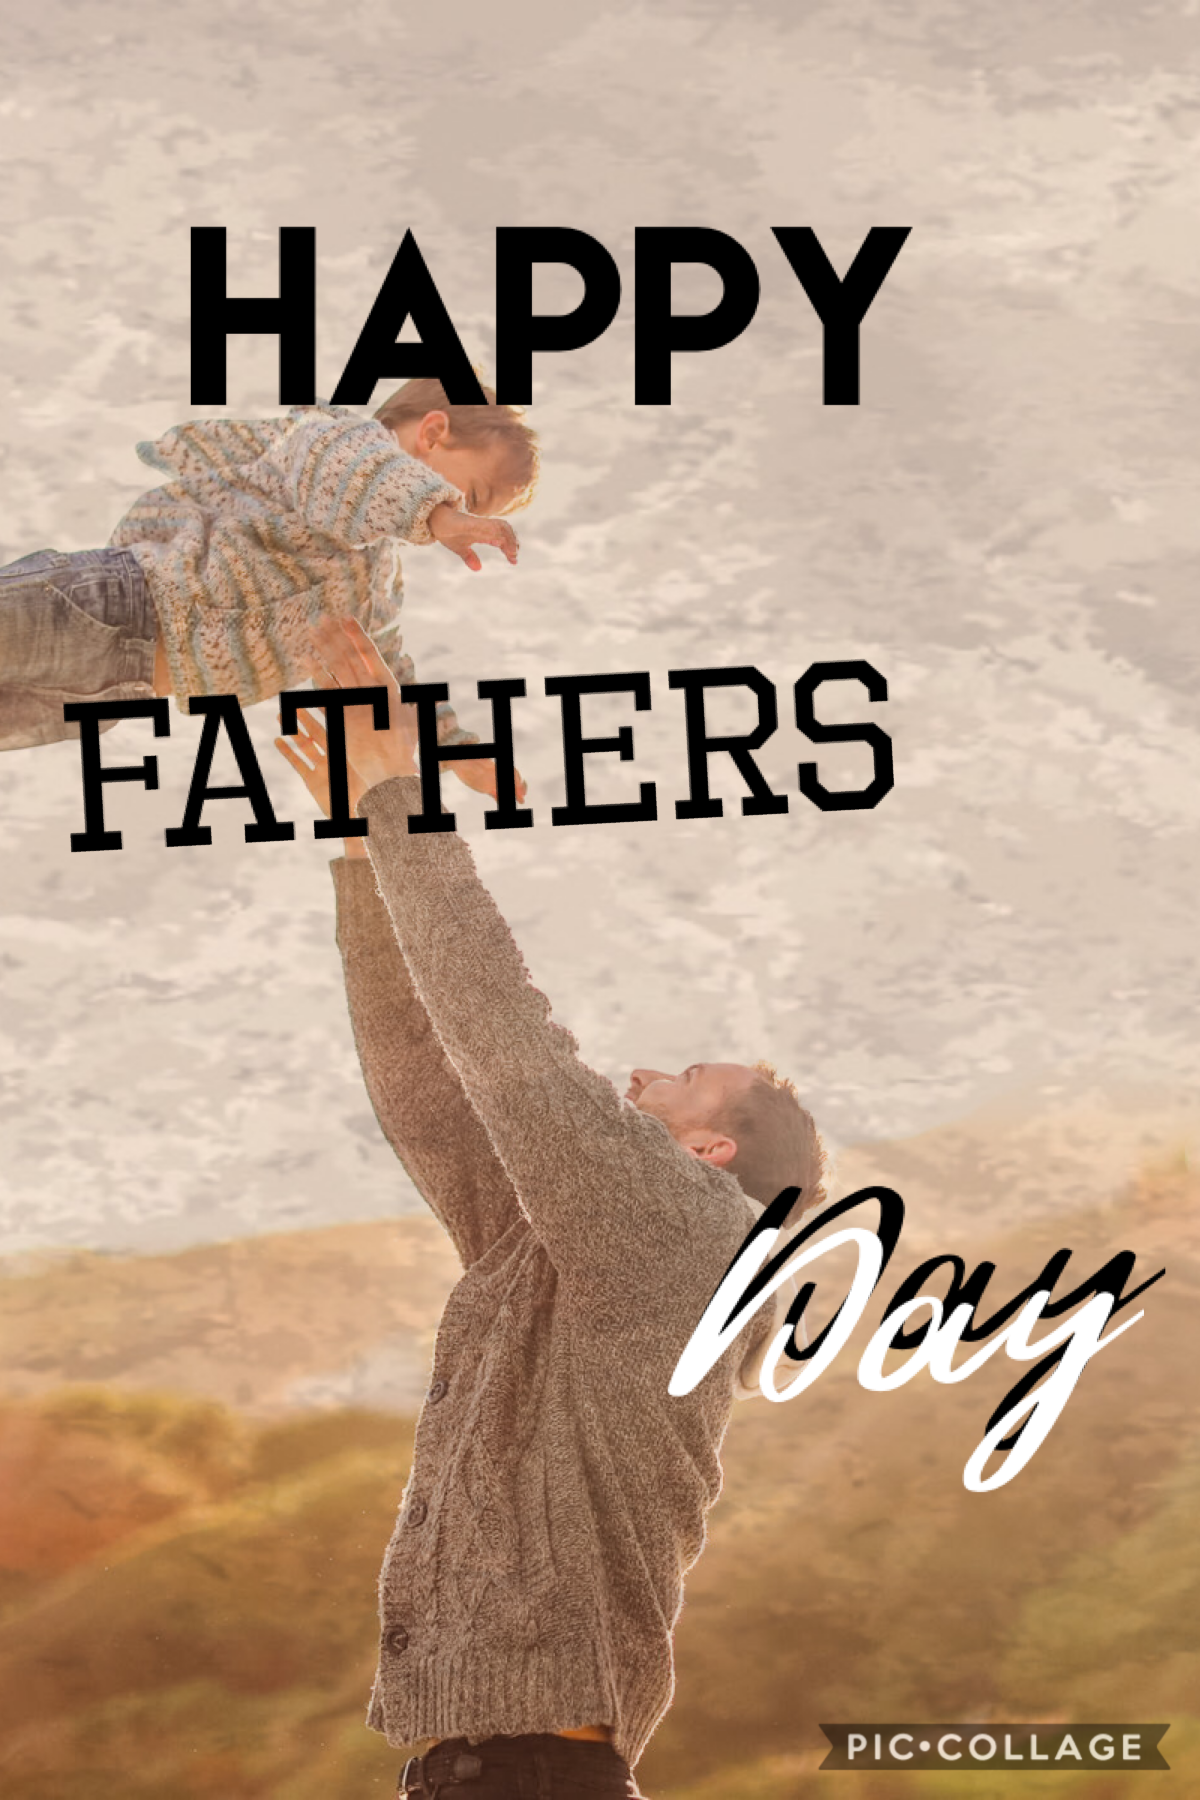 We love and appreciate the fathers in ours lives that are keeping us save during uncertain times give your dad a hug and happy Father’s Day 🧔